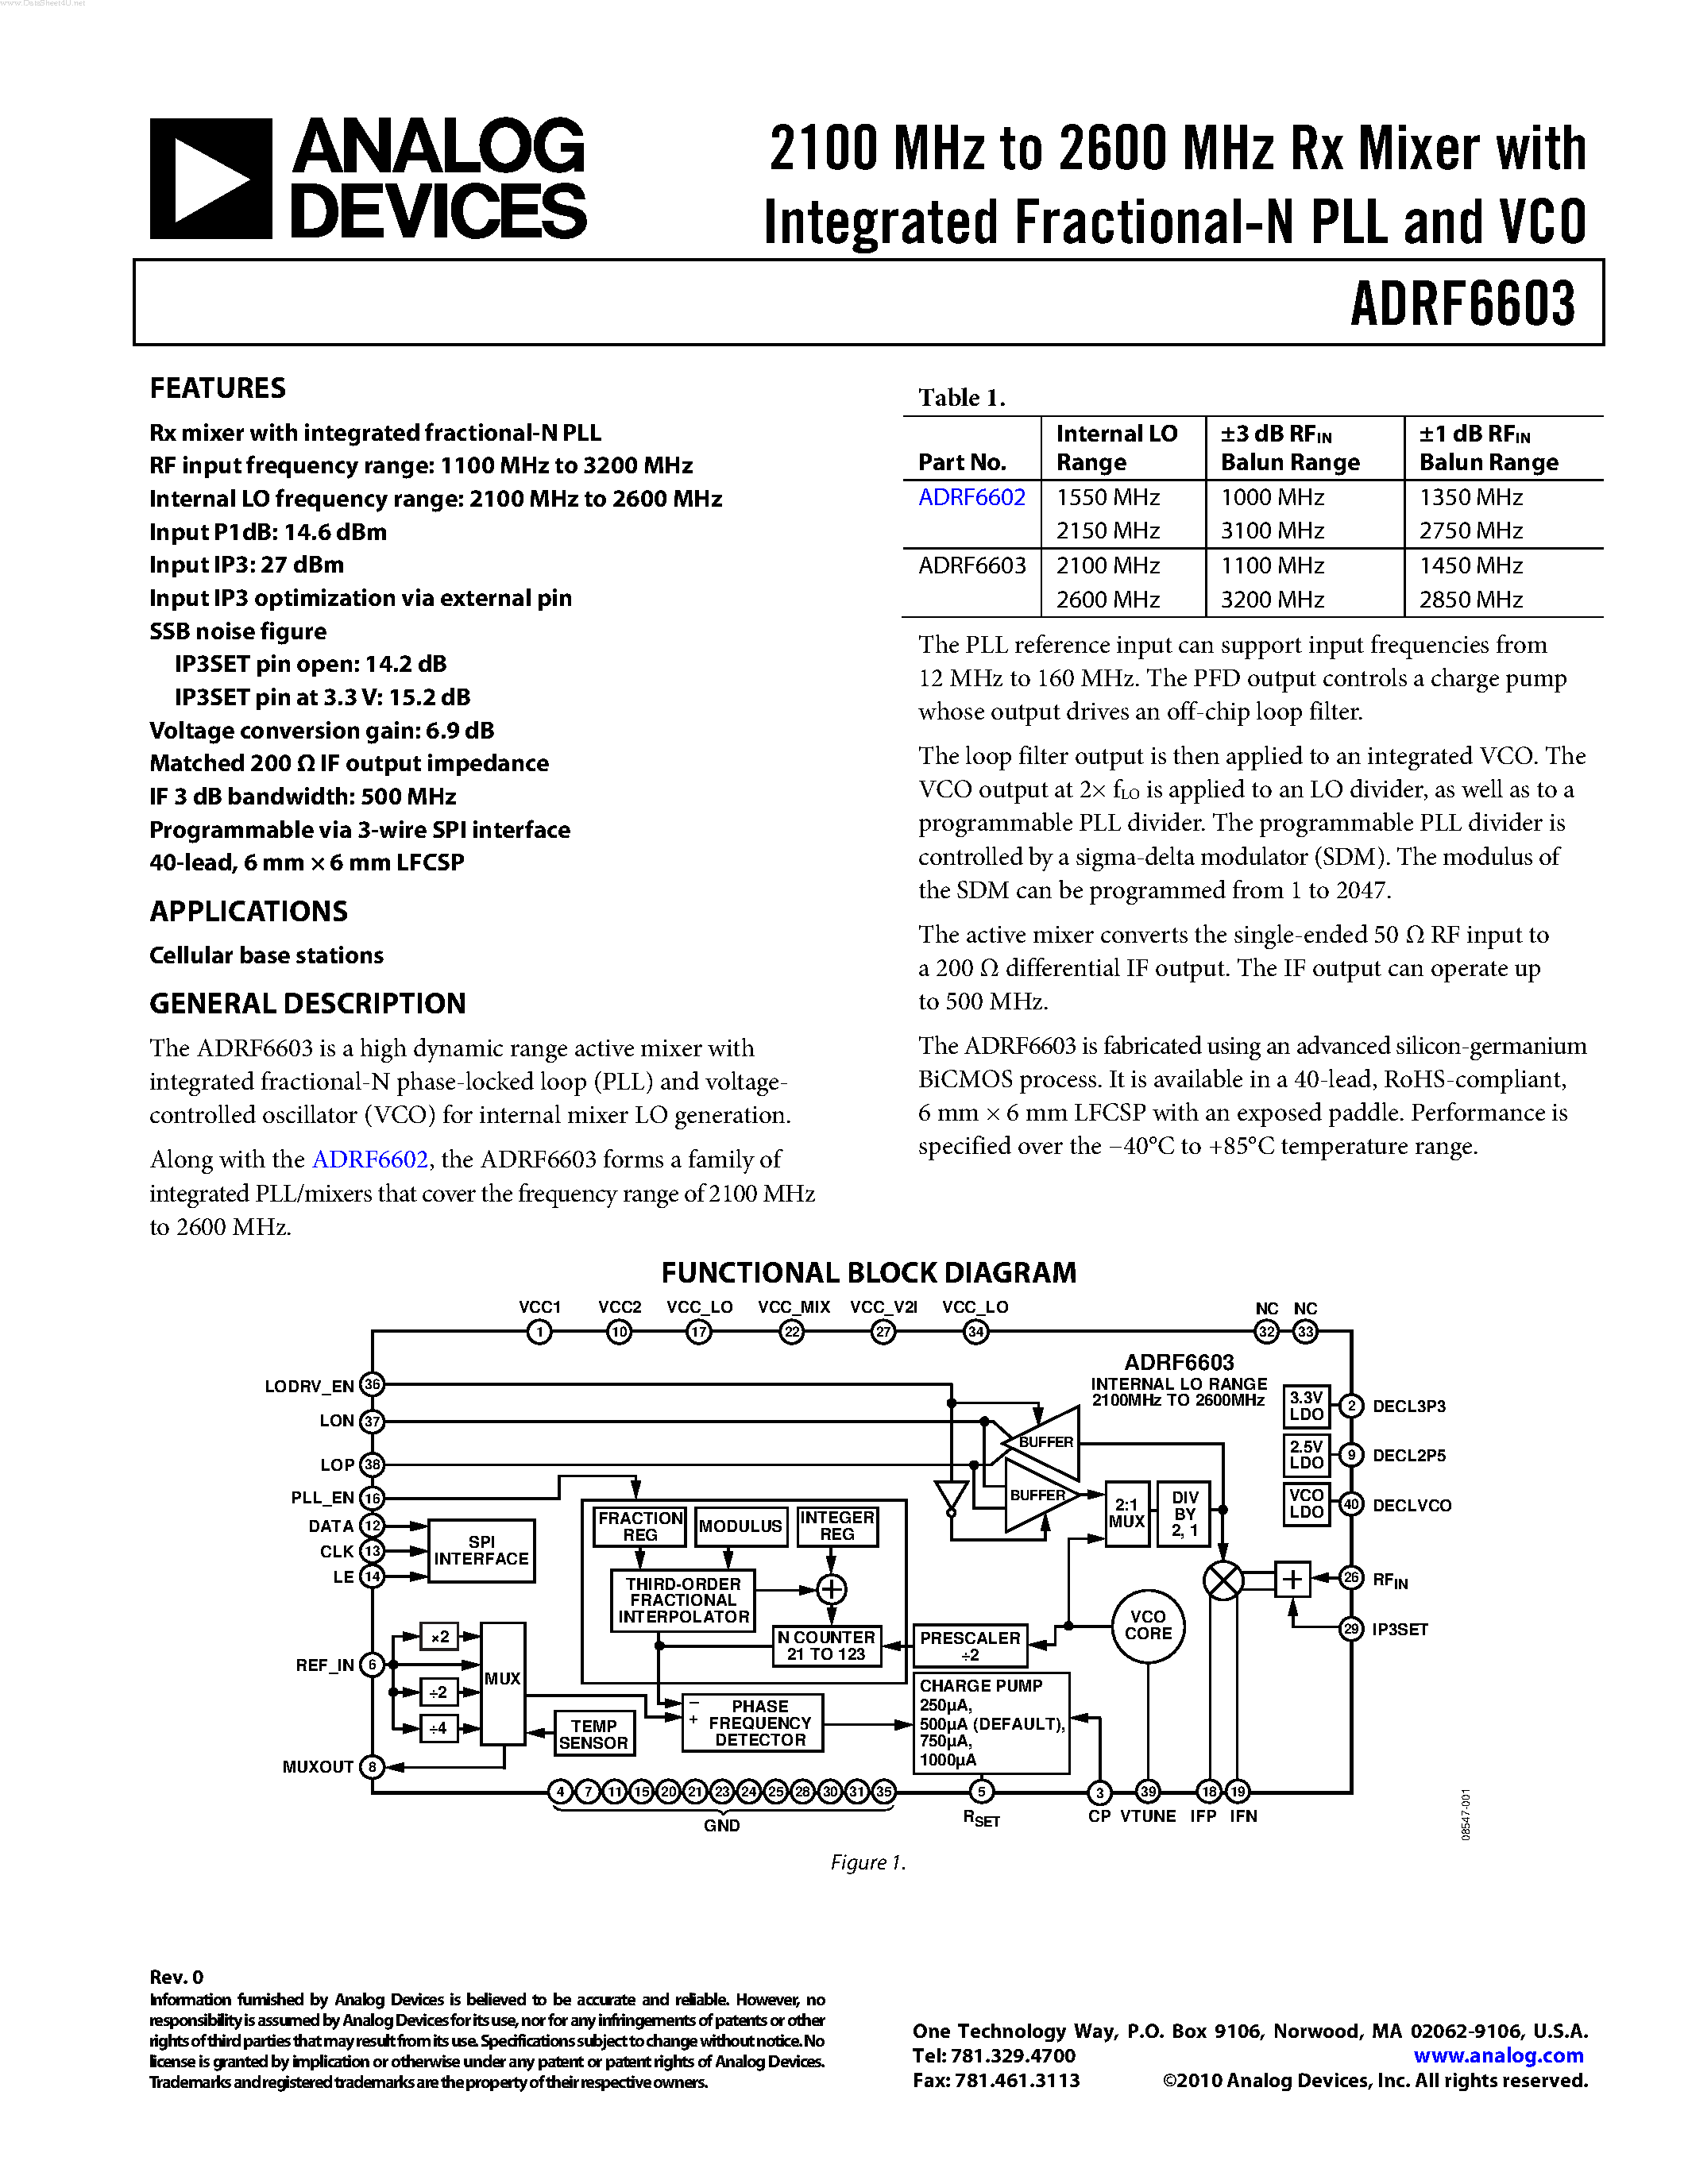 Datasheet ADRF6603 - 2100 MHz to 2600 MHz Rx Mixer page 1